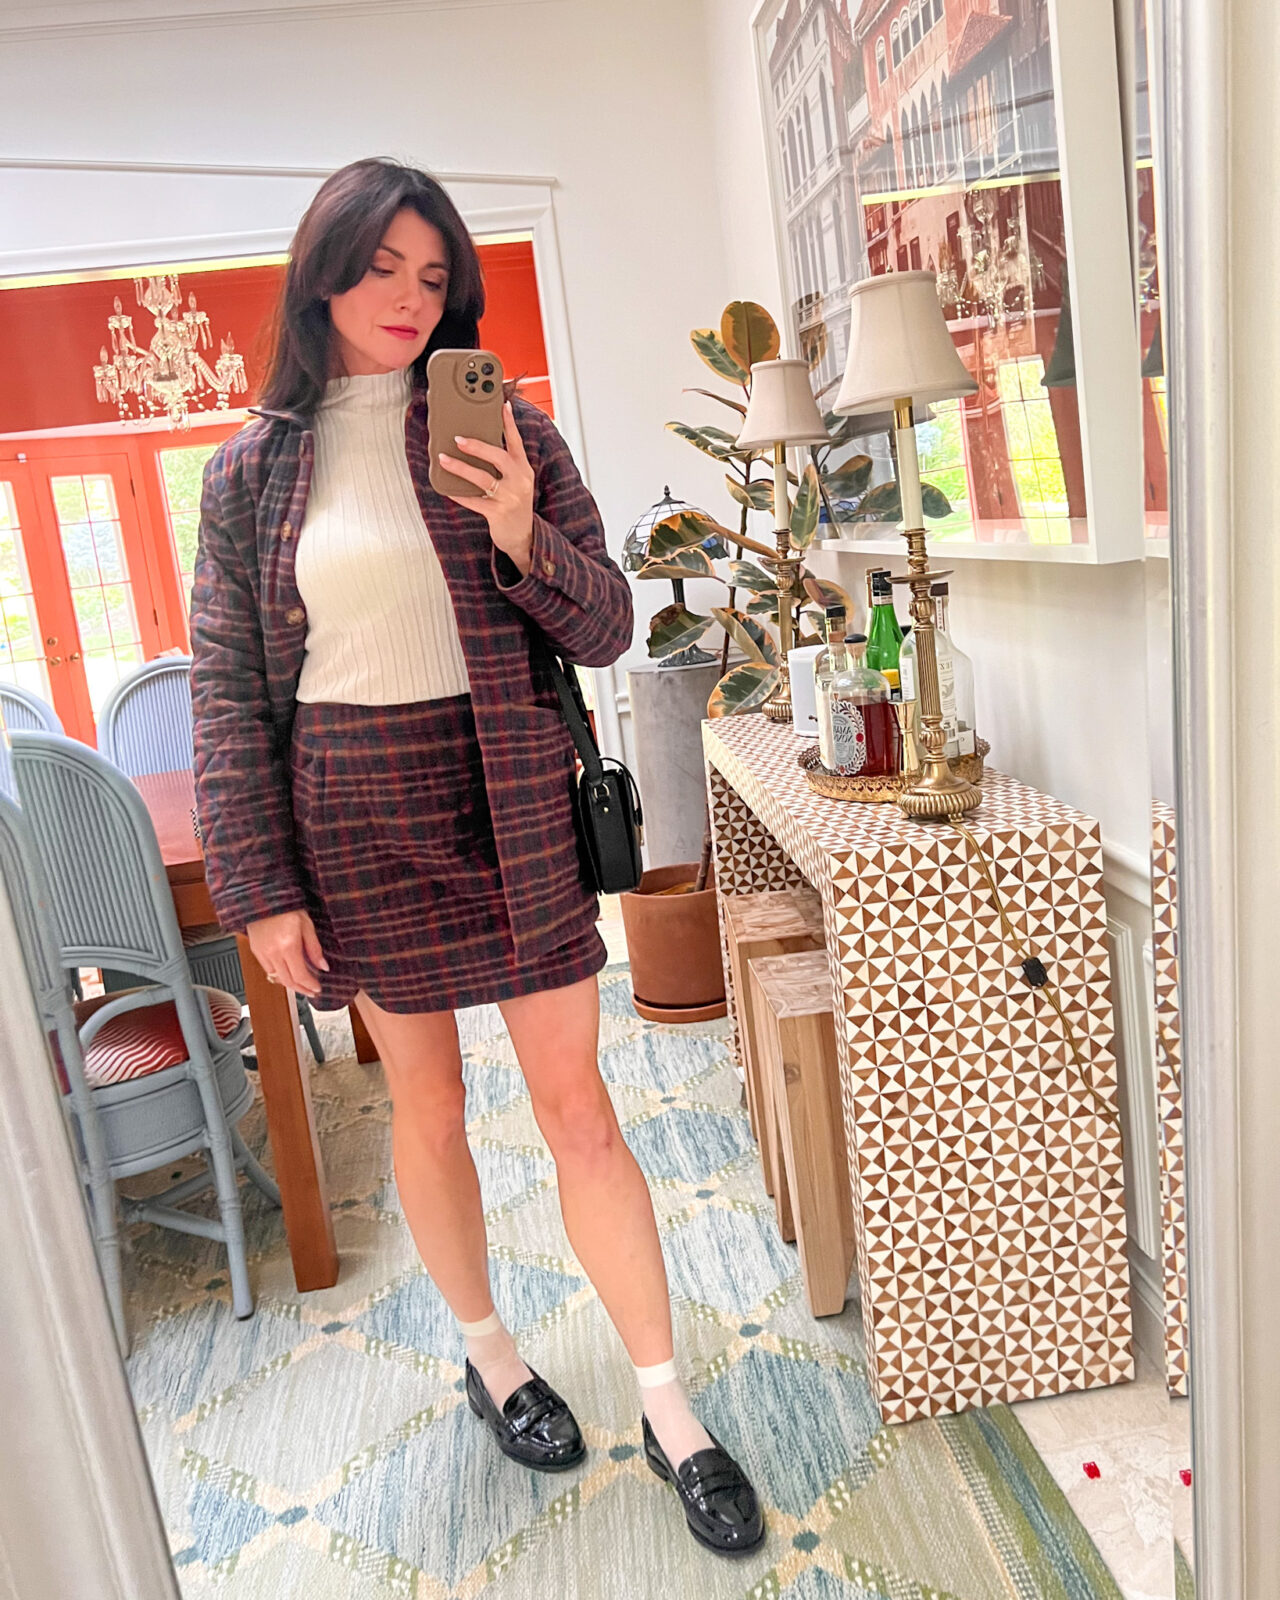 Mirror selfie of a matching tartan jacket and skirt. The outfit is finished off with black loafers. 